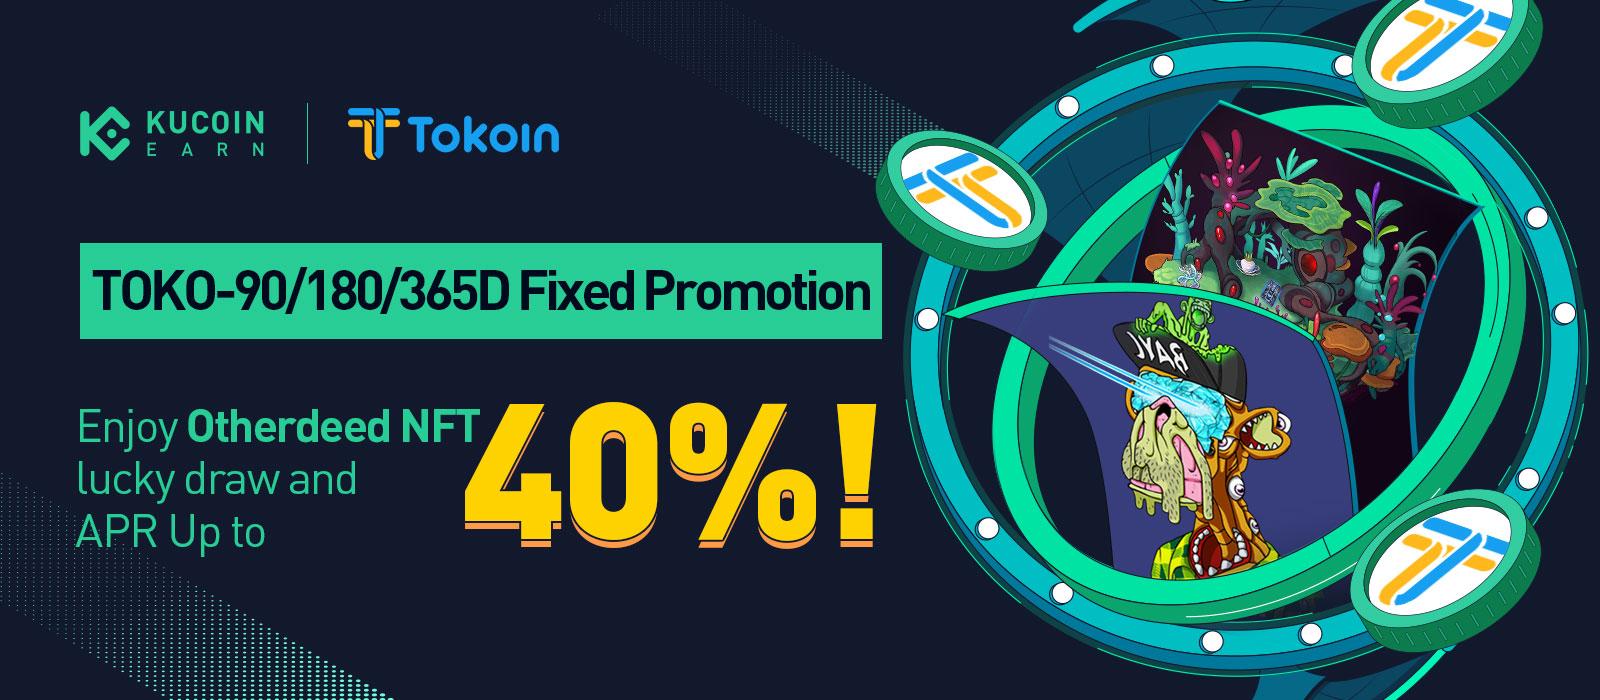 TOKO Fixed Promotions, Join the Exclusive Lucky Draw and Up to 40% APR!